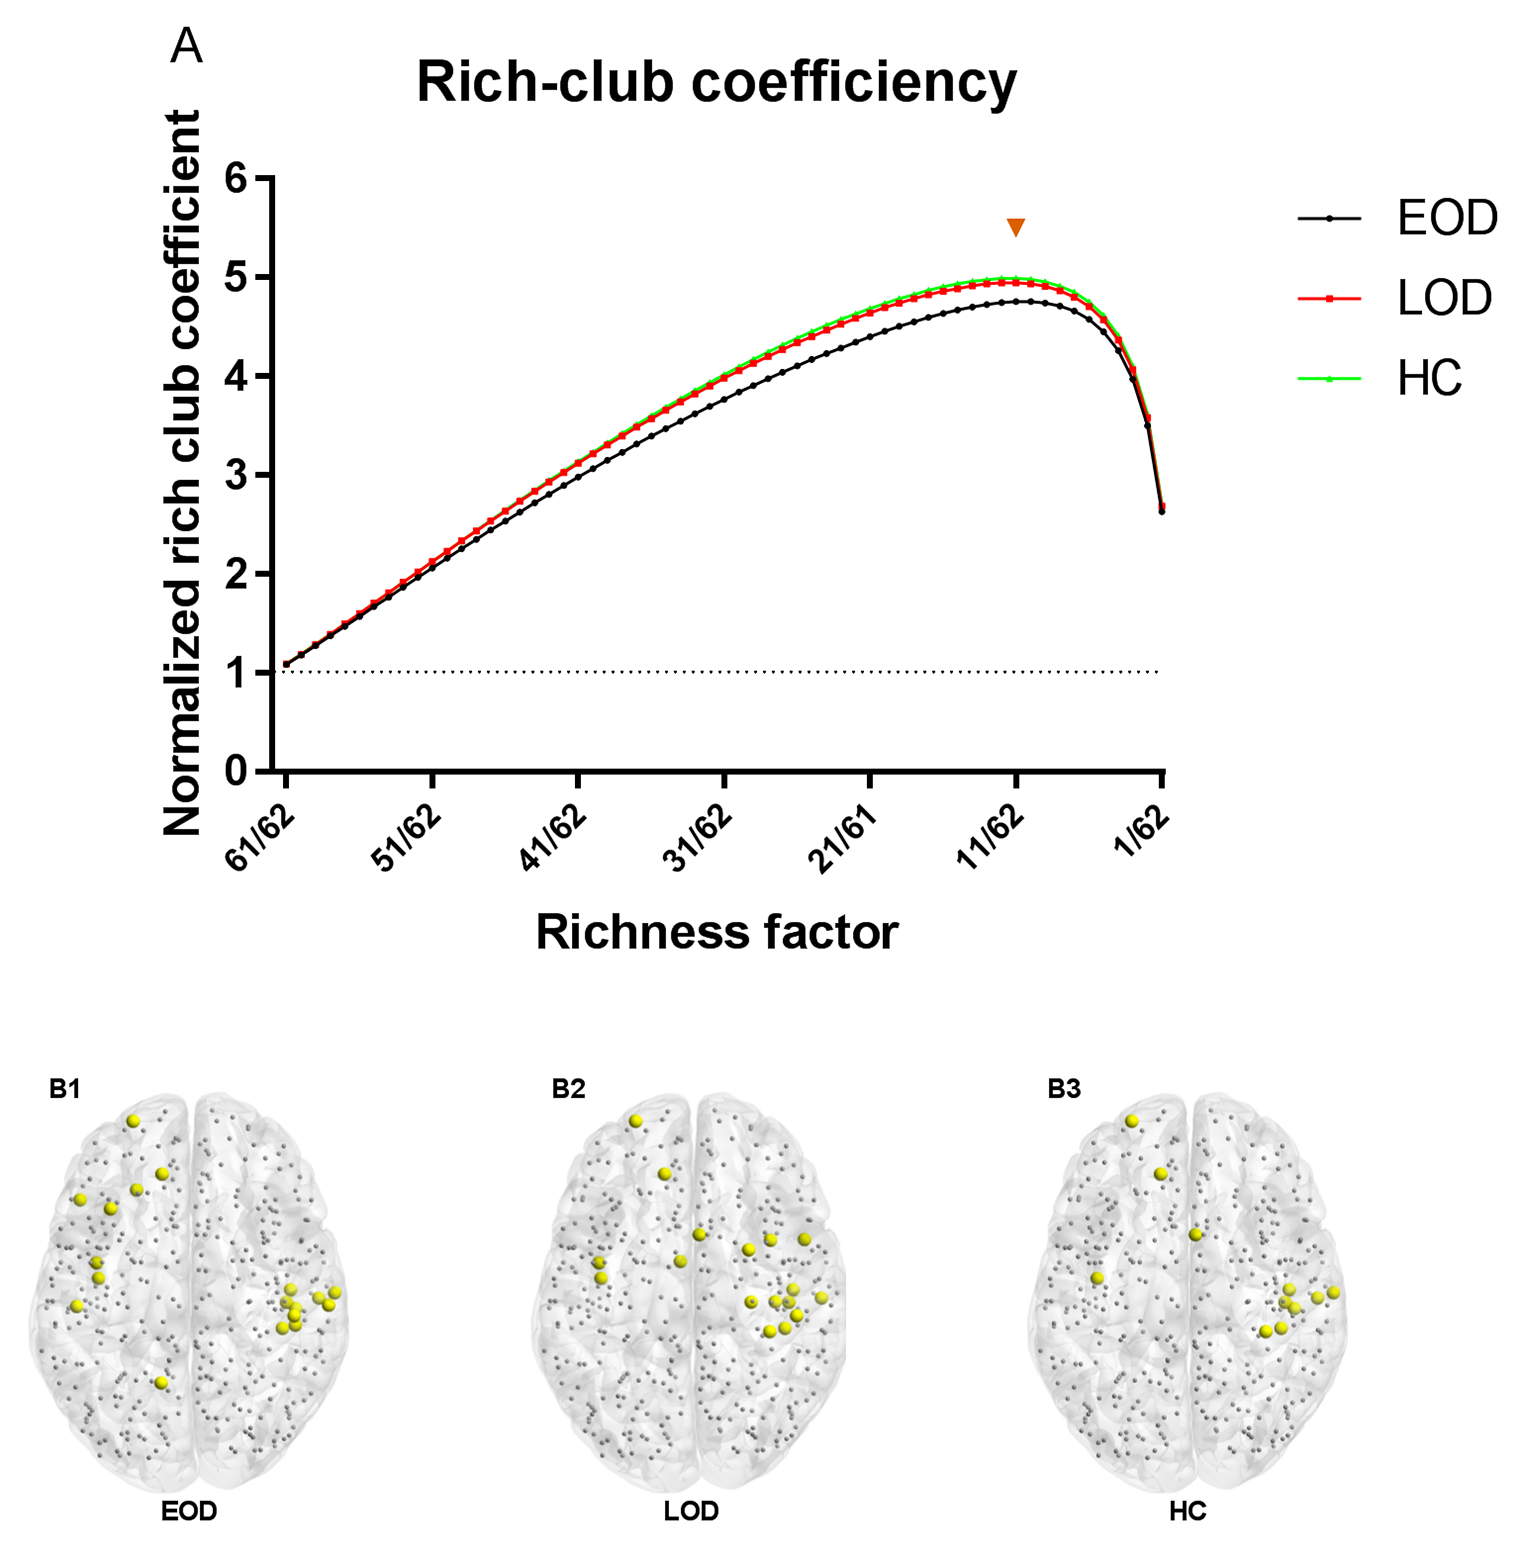 Increasing variance of rich-club nodes distribution in early onset depression according to dynamic network